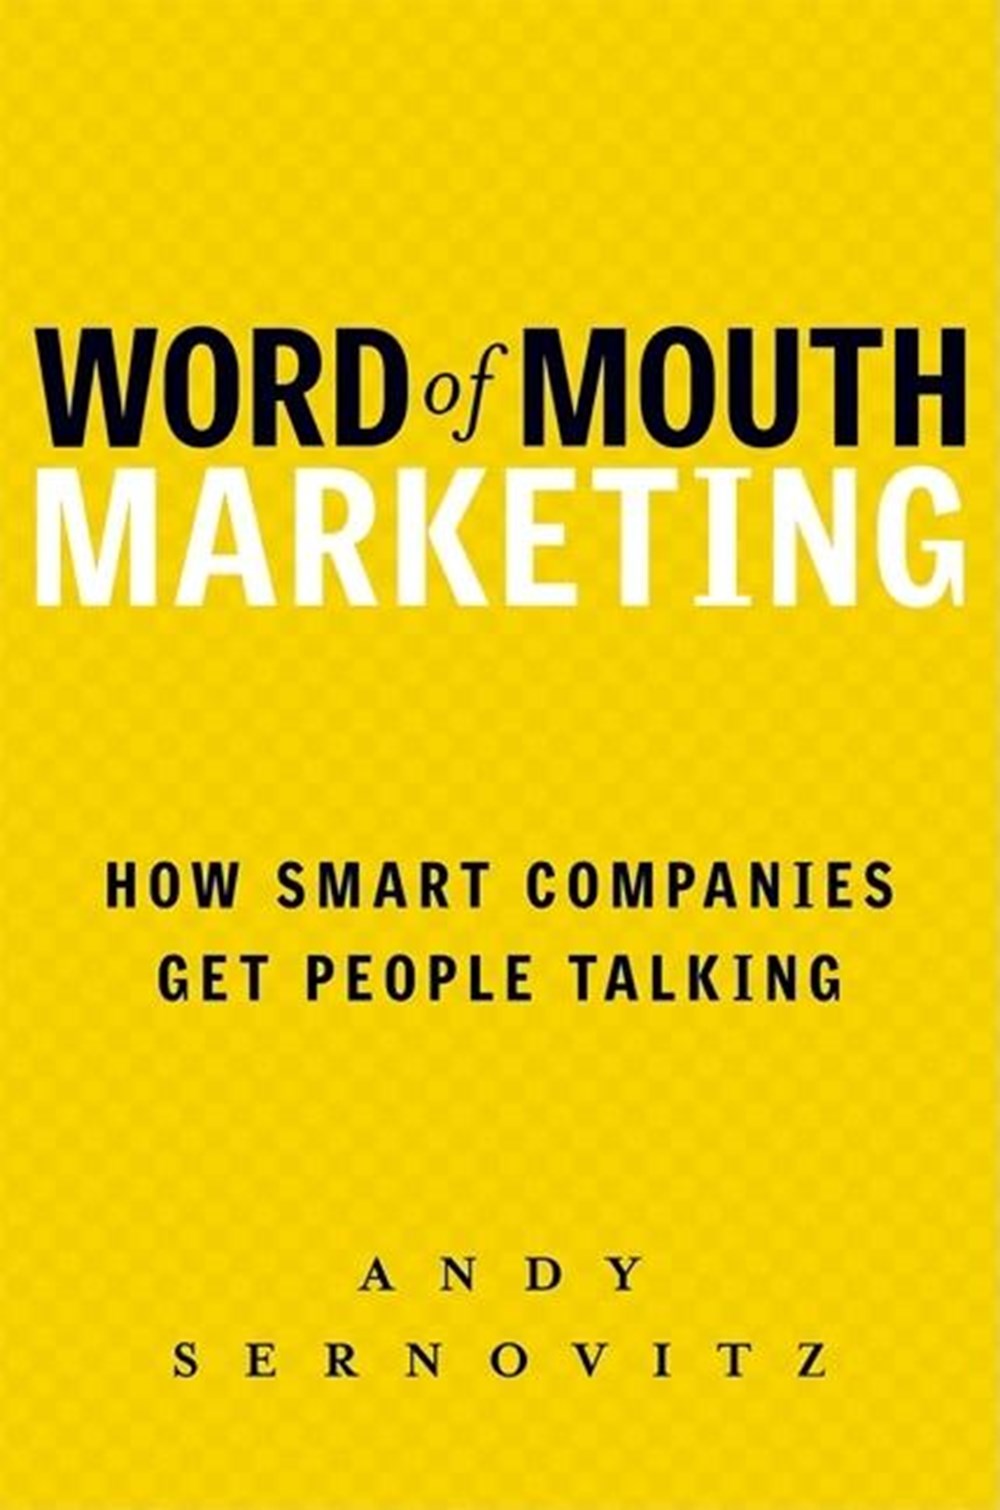 Word of Mouth Marketing How Smart Companies Get People Talking (Revised)